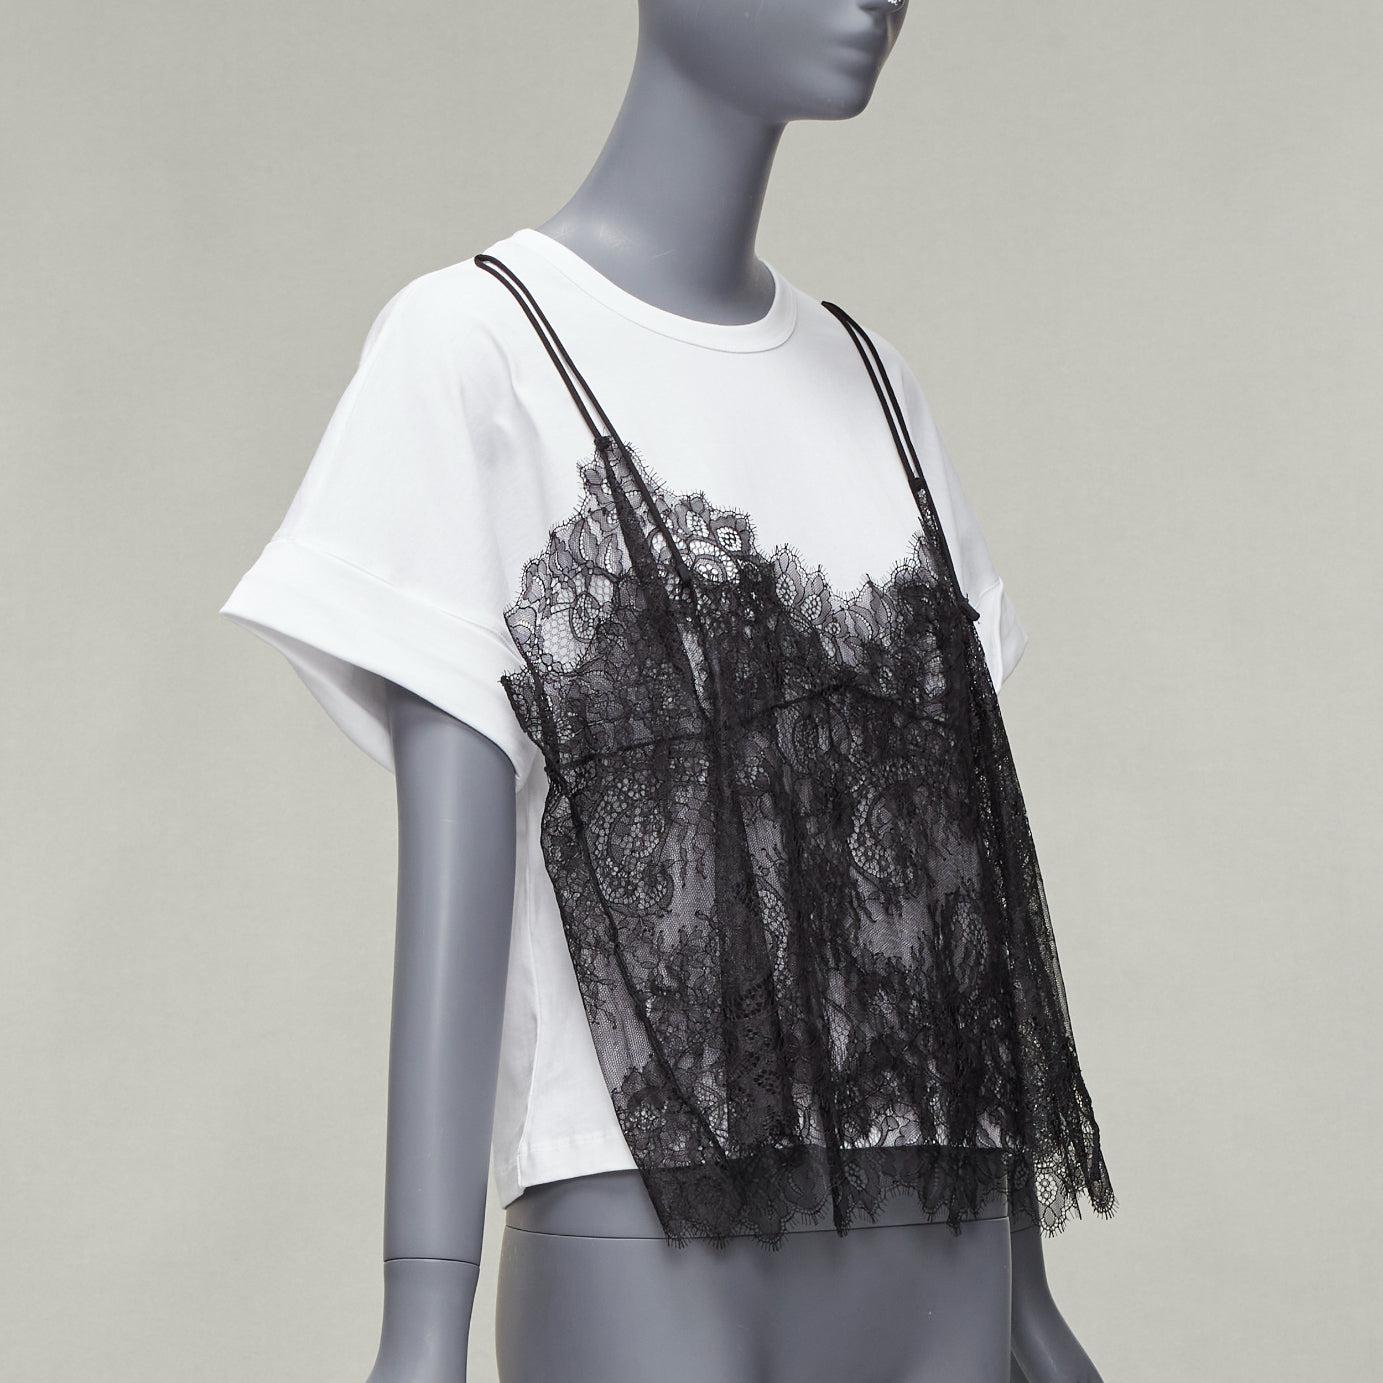 PHILOSOPHY Lorenzo Serafini tromp loiel draped silk camisole white tshirt XS In Excellent Condition For Sale In Hong Kong, NT